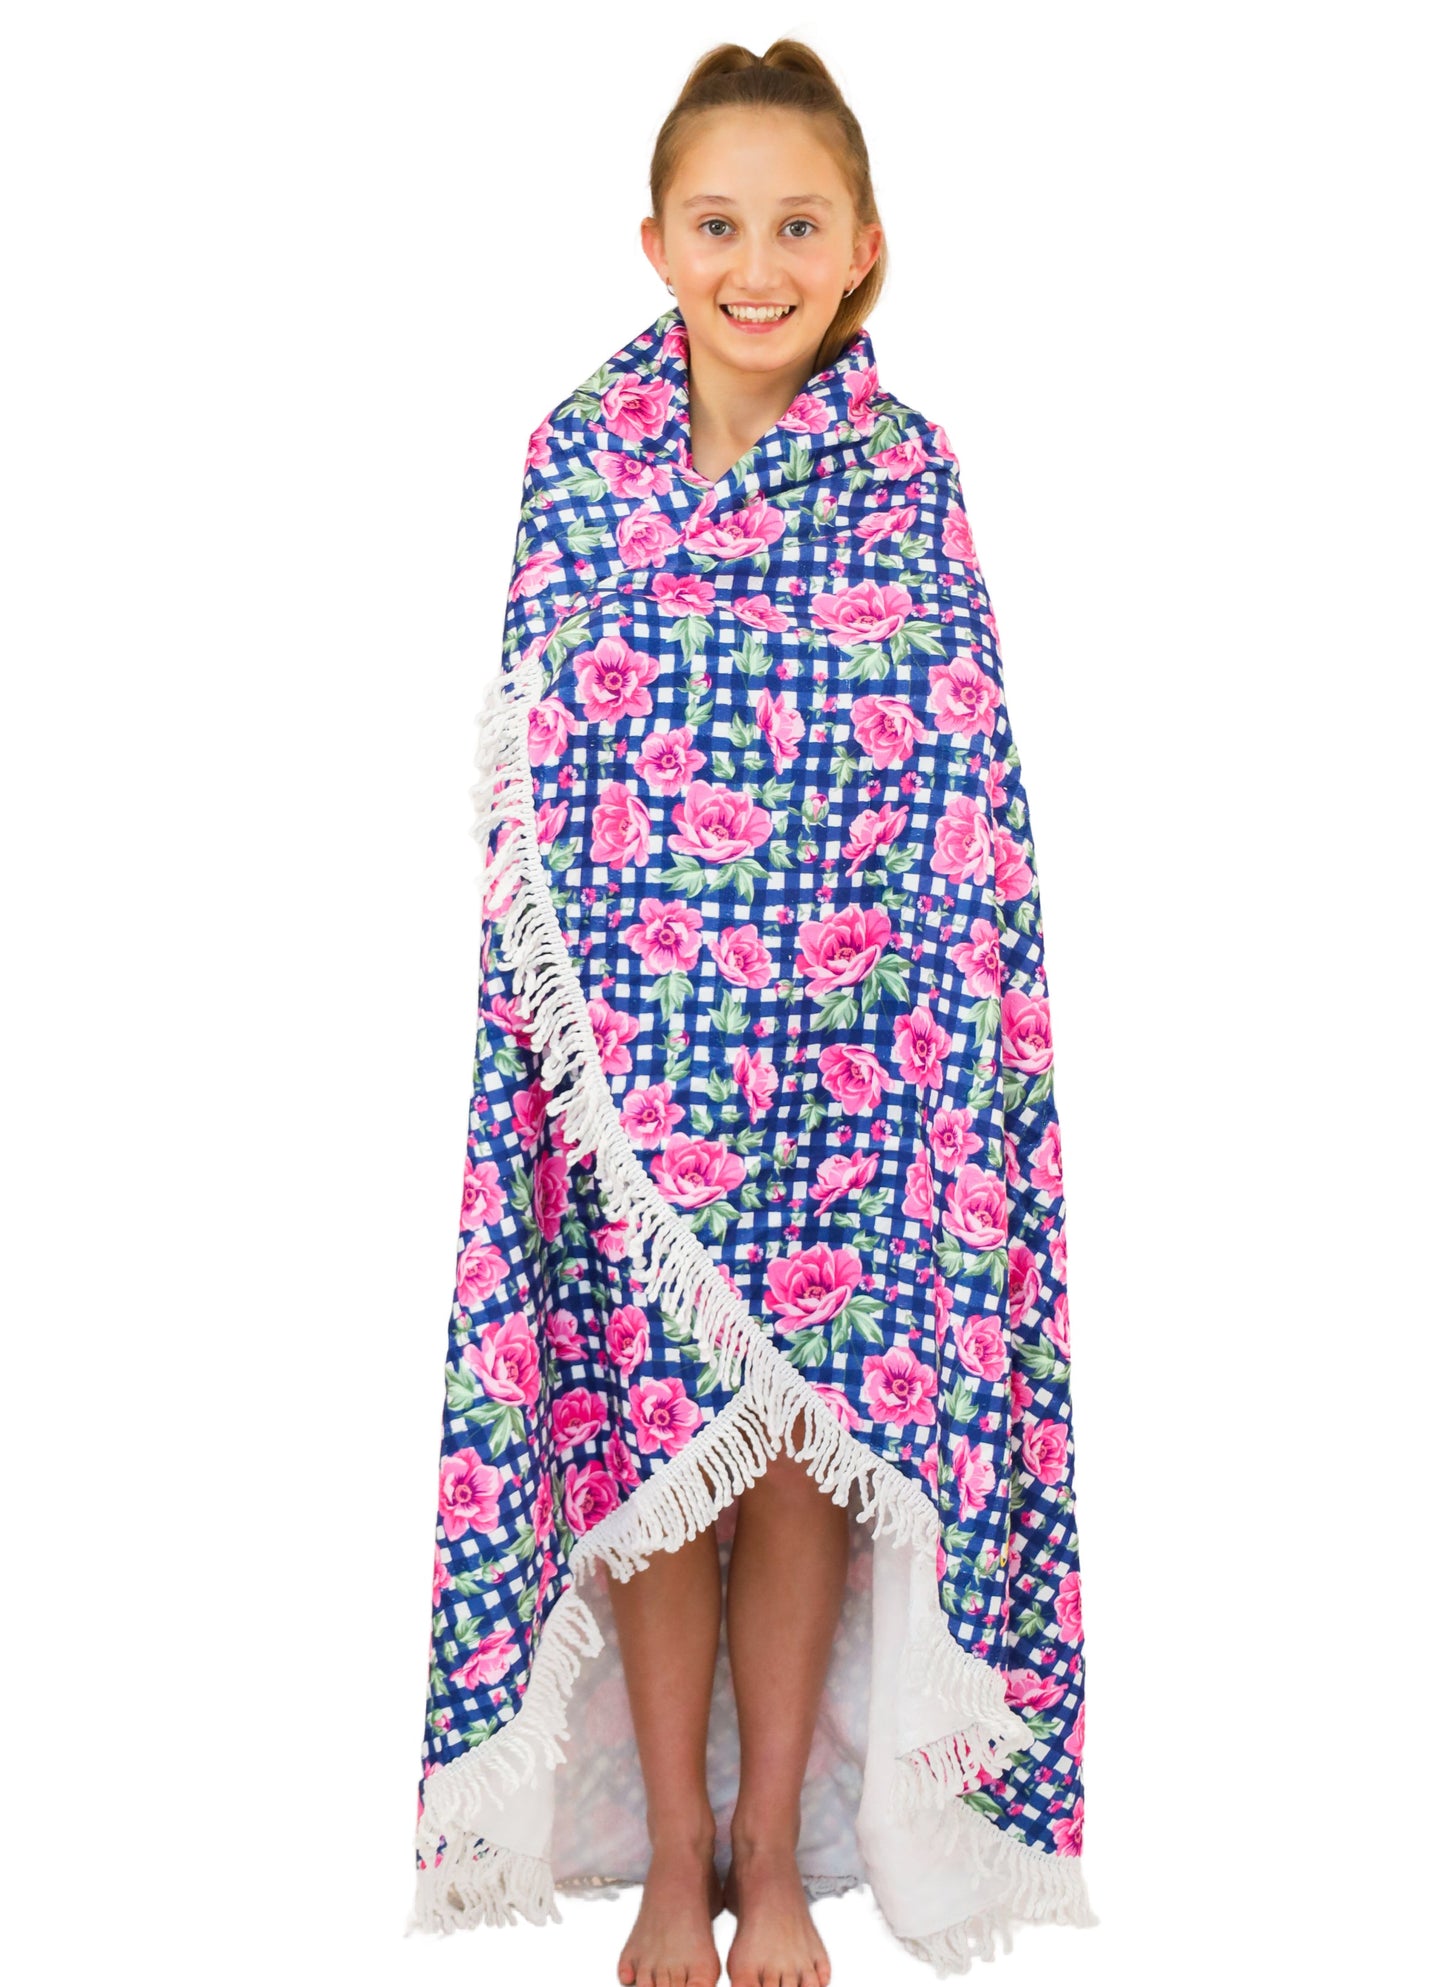 Floral Check - Round Beach Towels